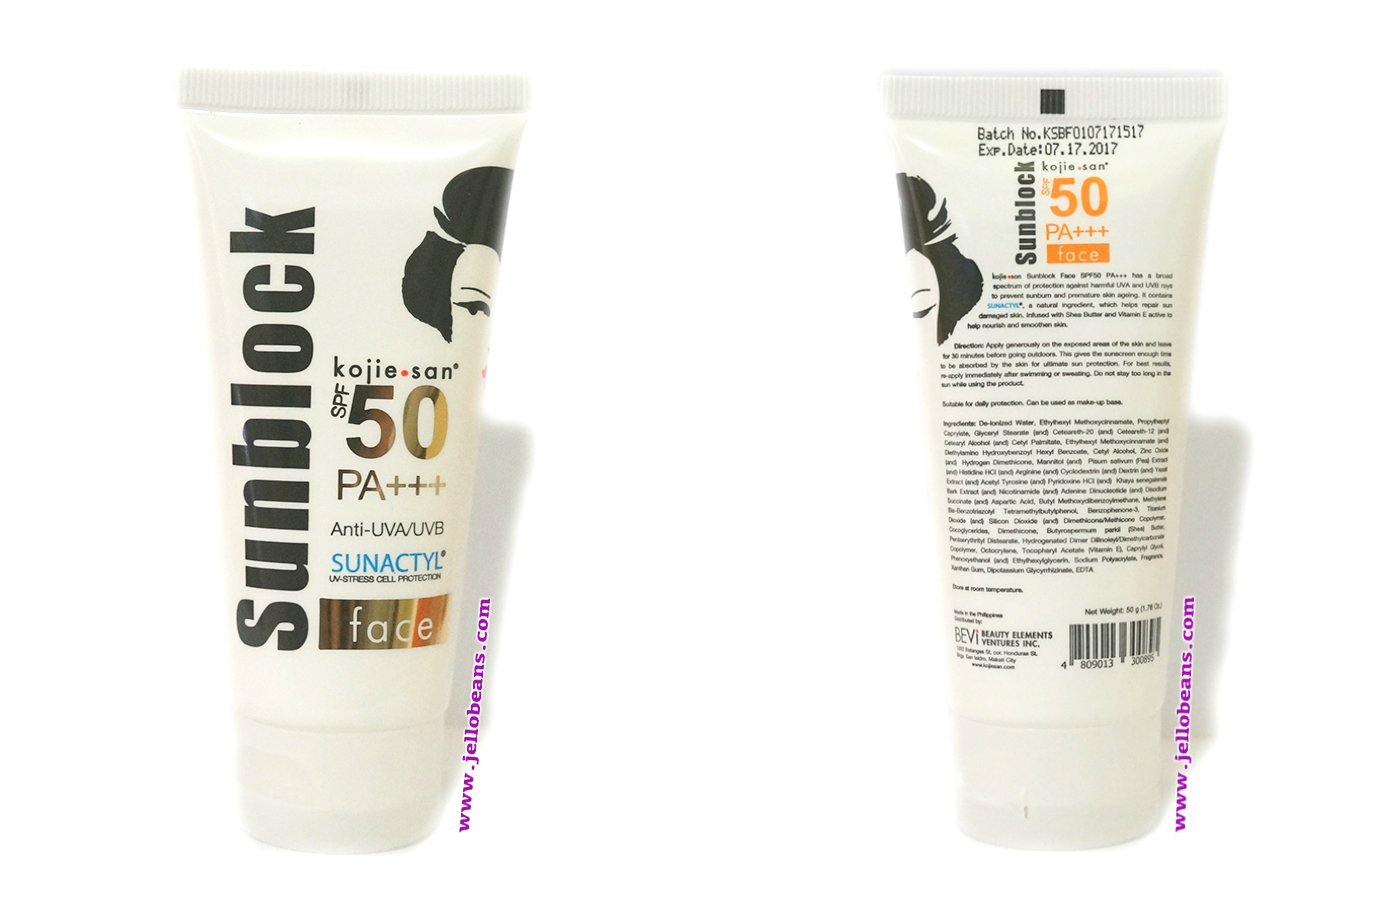 Kojie San Sunblock for Face SPF 50 PA+++ | Review - Jello ...